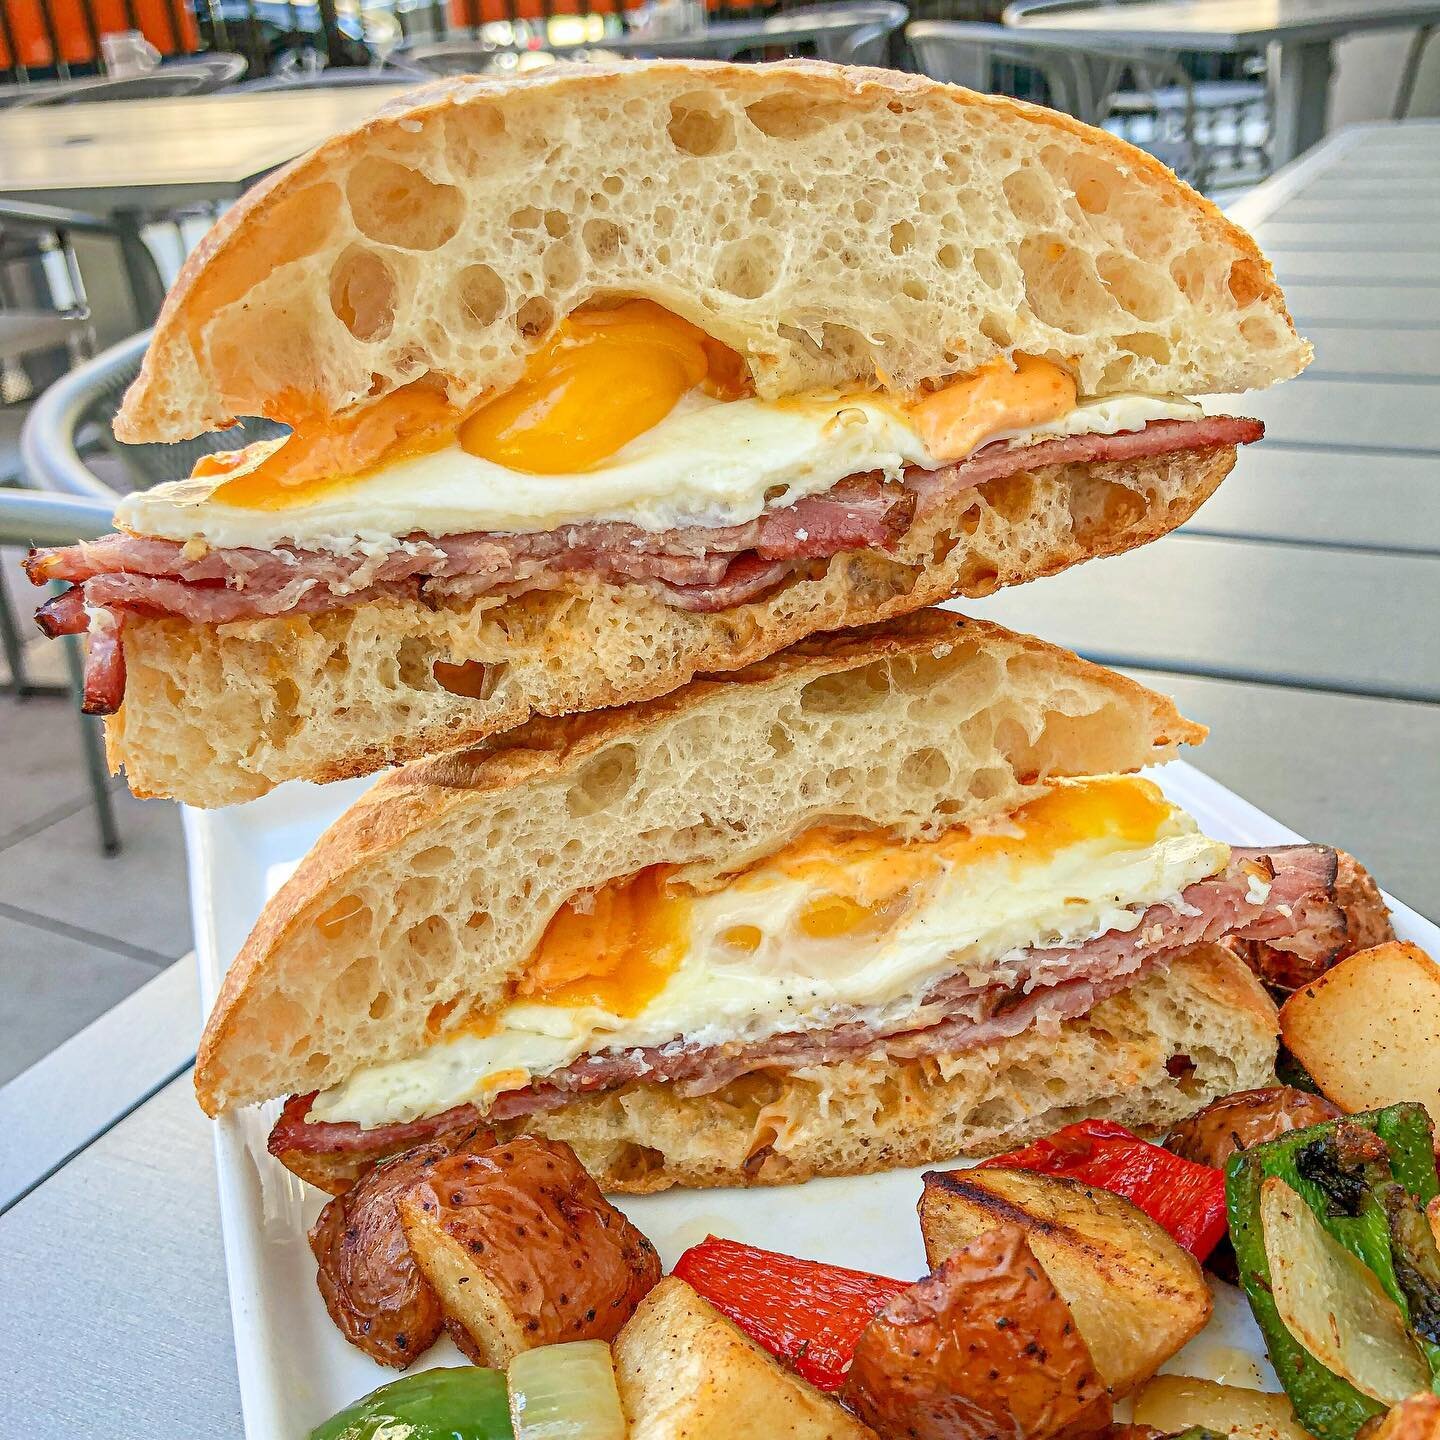 Pancakes aren't the only thing we're stacking 😉 This is our delicious Sriracha egg sandwich! Come and get it at our Little Italy and Milwaukee locations!